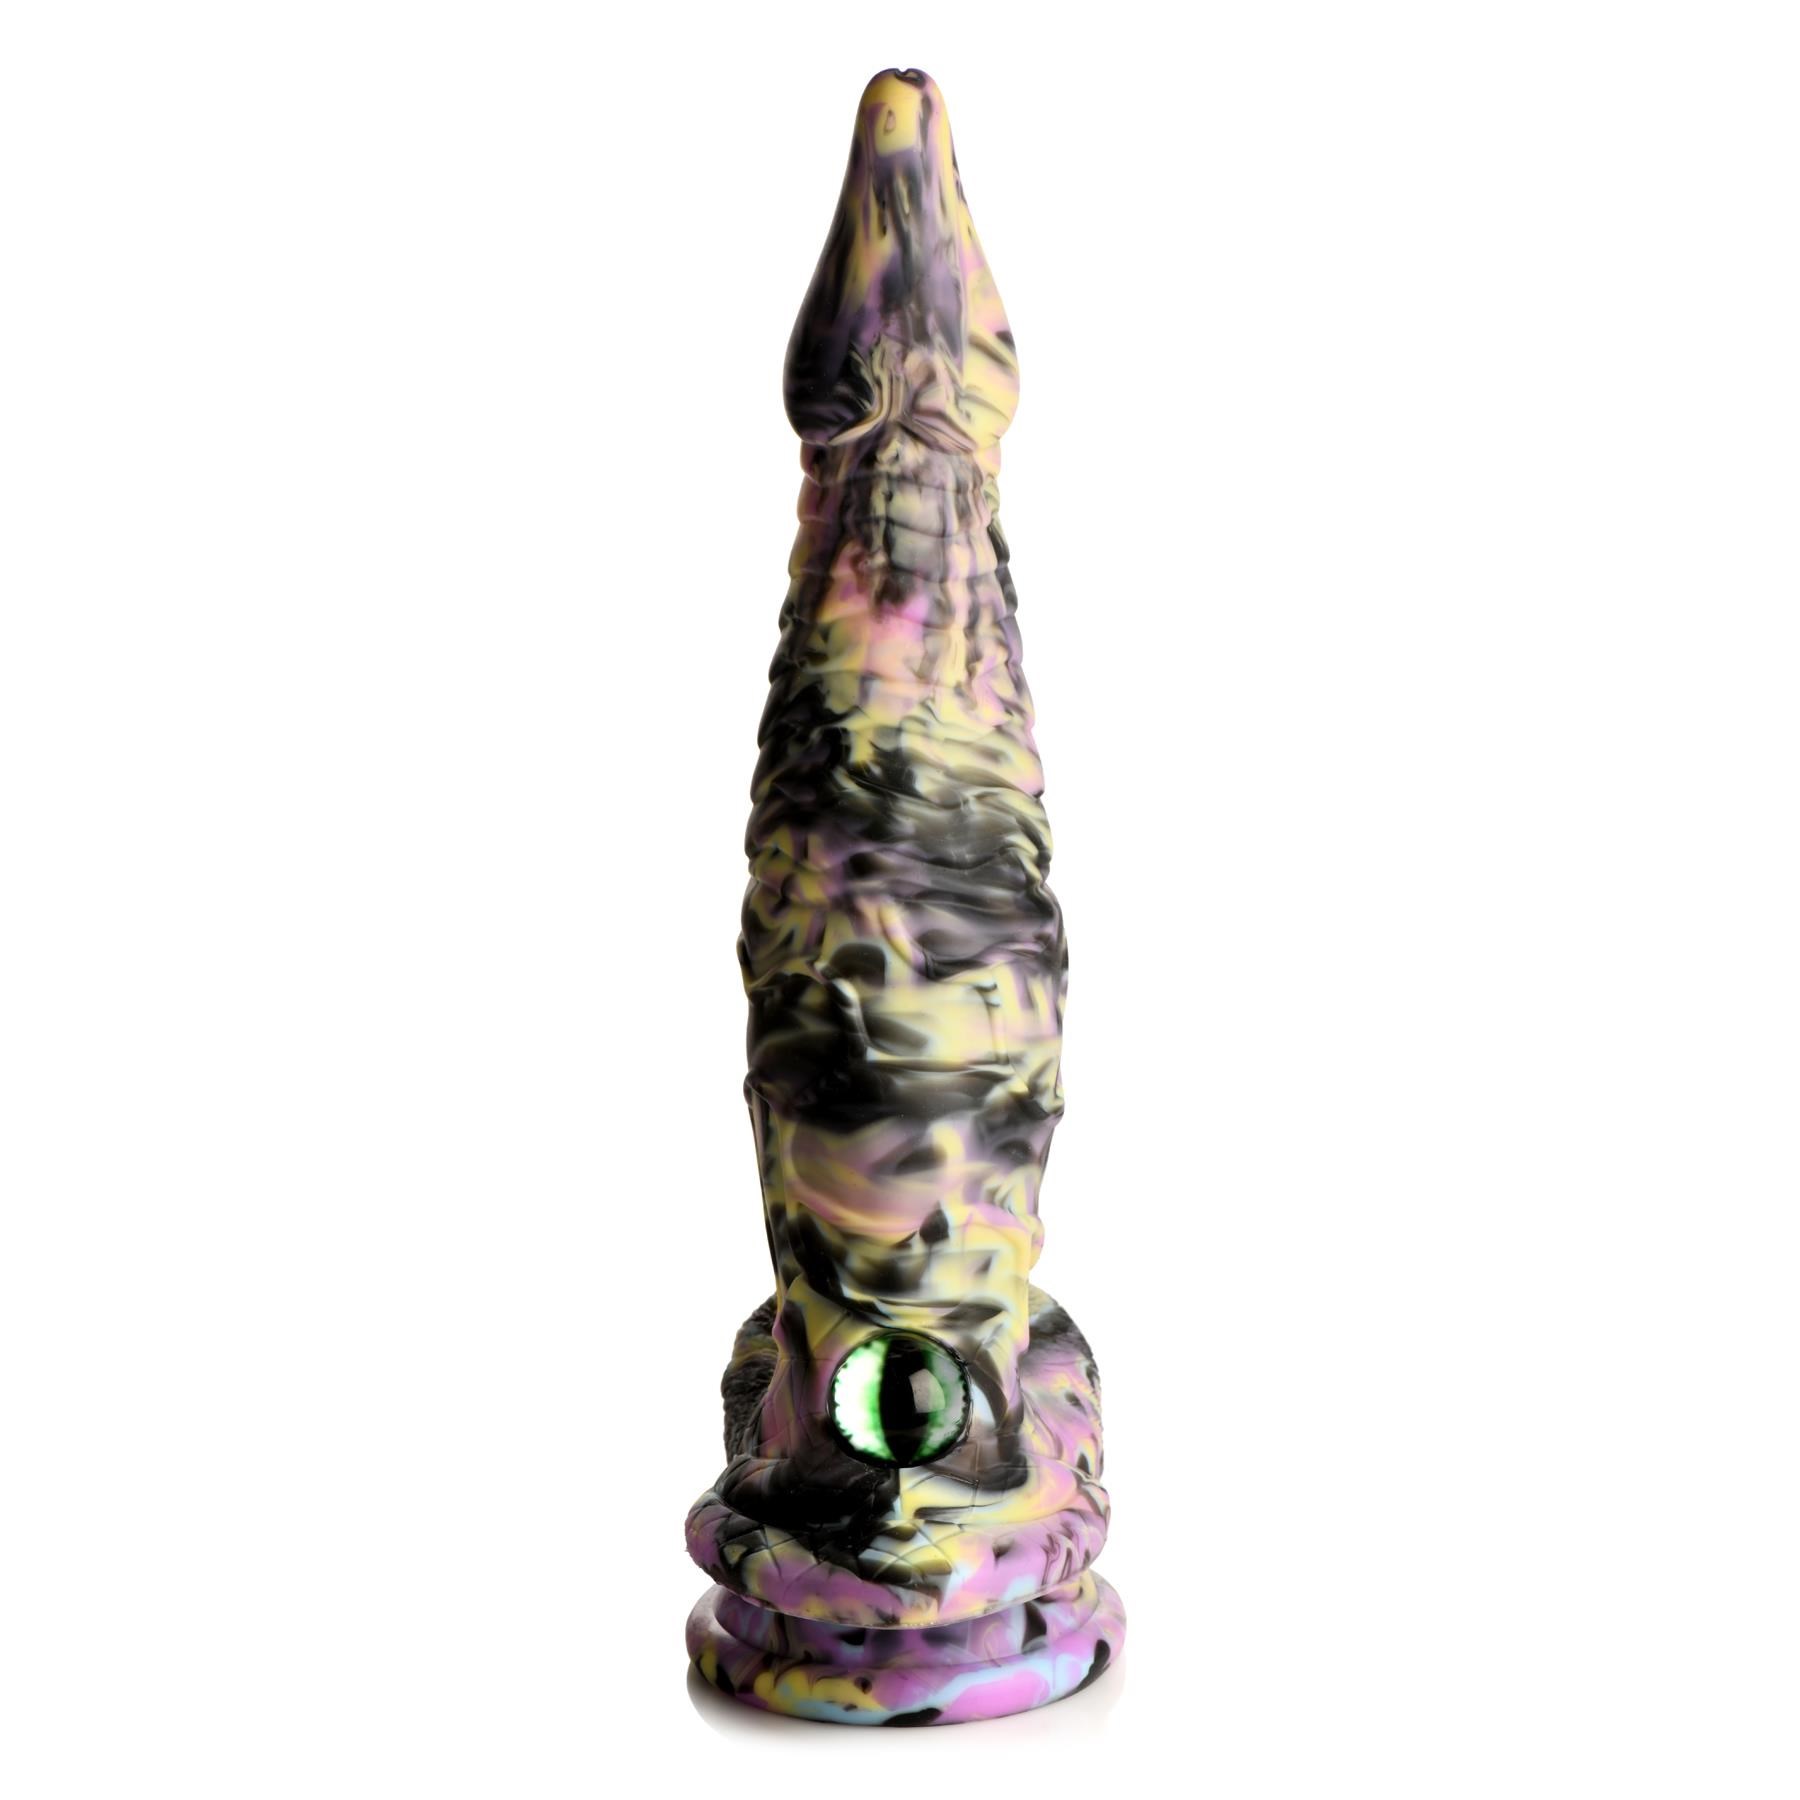 CreatureCocks Cyclops Monster Silicone Dildo - Product Shot #1